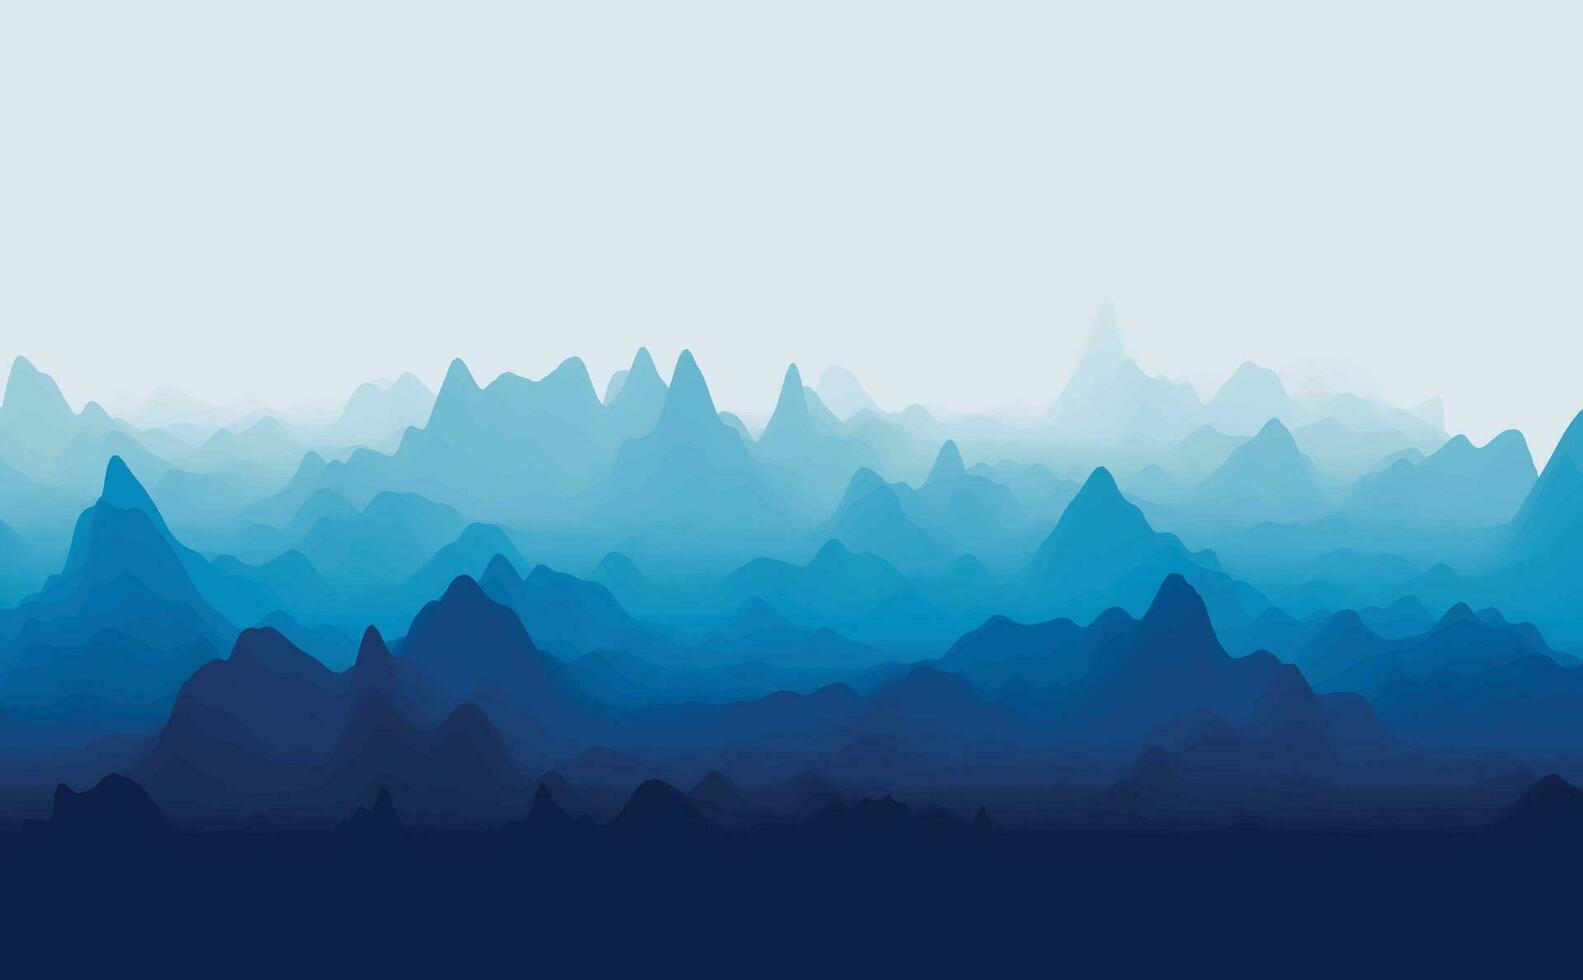 Nature landscape with mountain peaks. Mountains traveling vacation vector background. Concept outdoor design